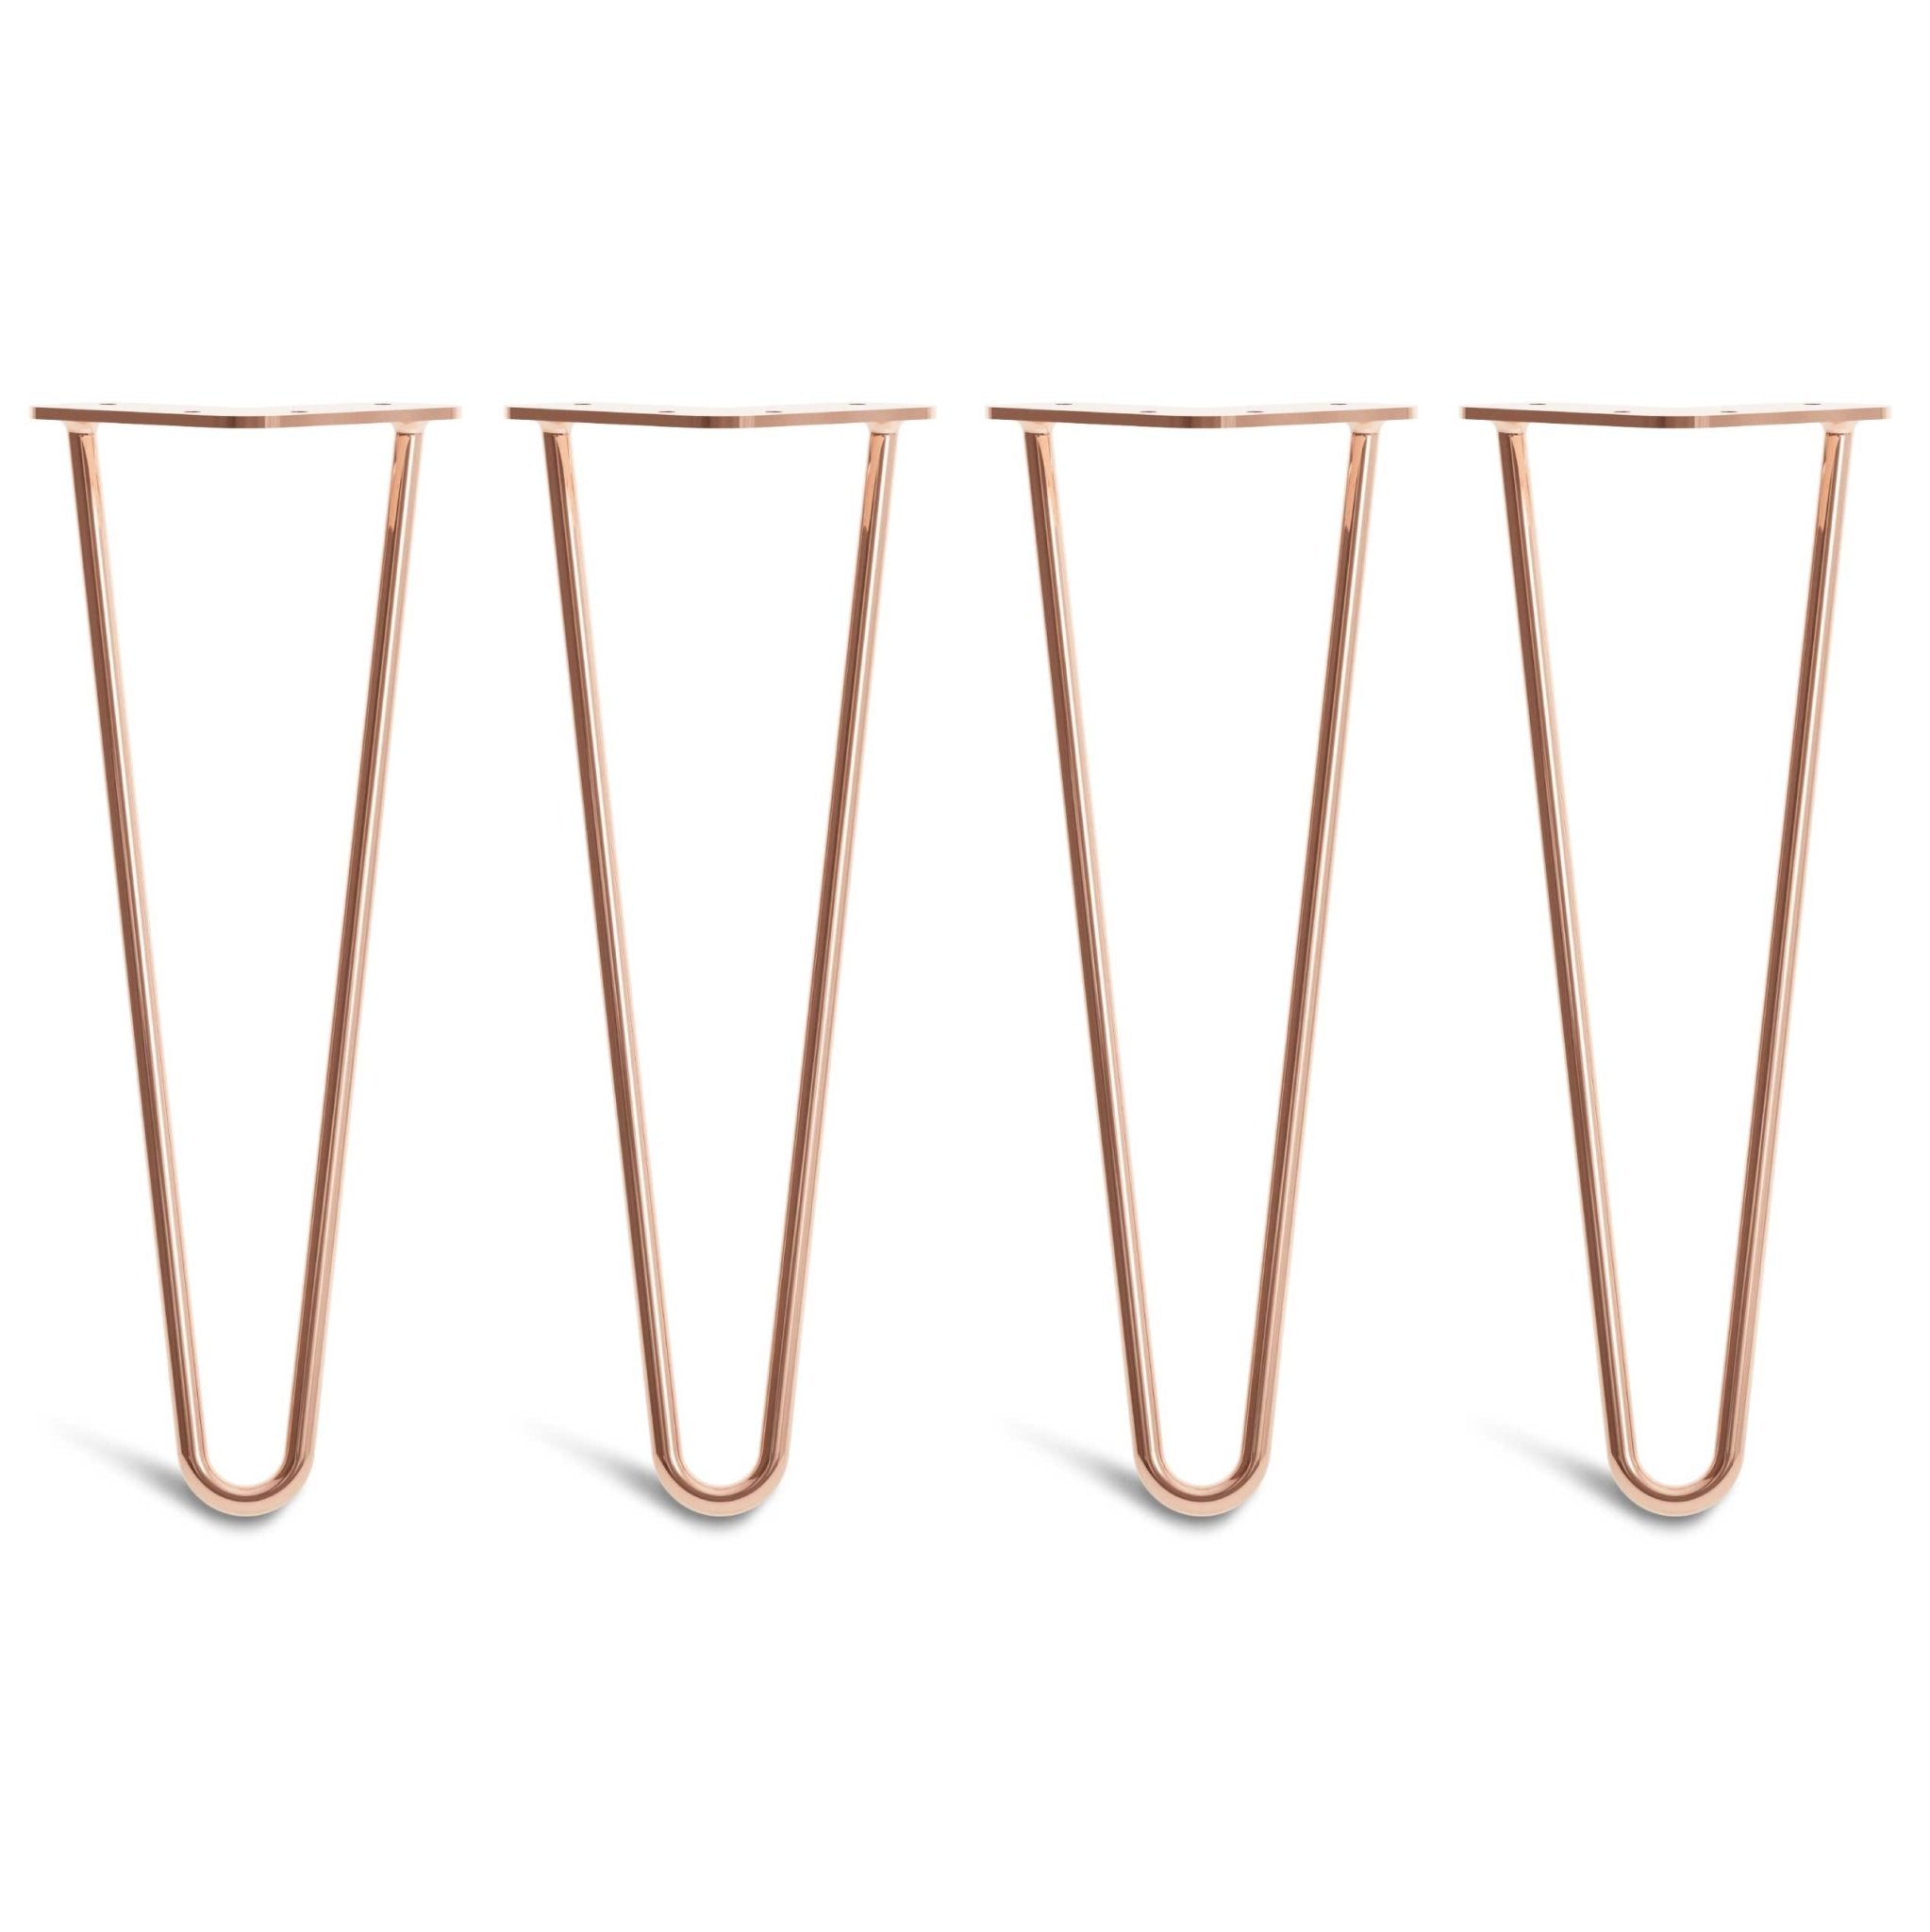 35cm Hairpin Legs - Coffee Table-2 Rod-Copper-The Hairpin Leg Co.